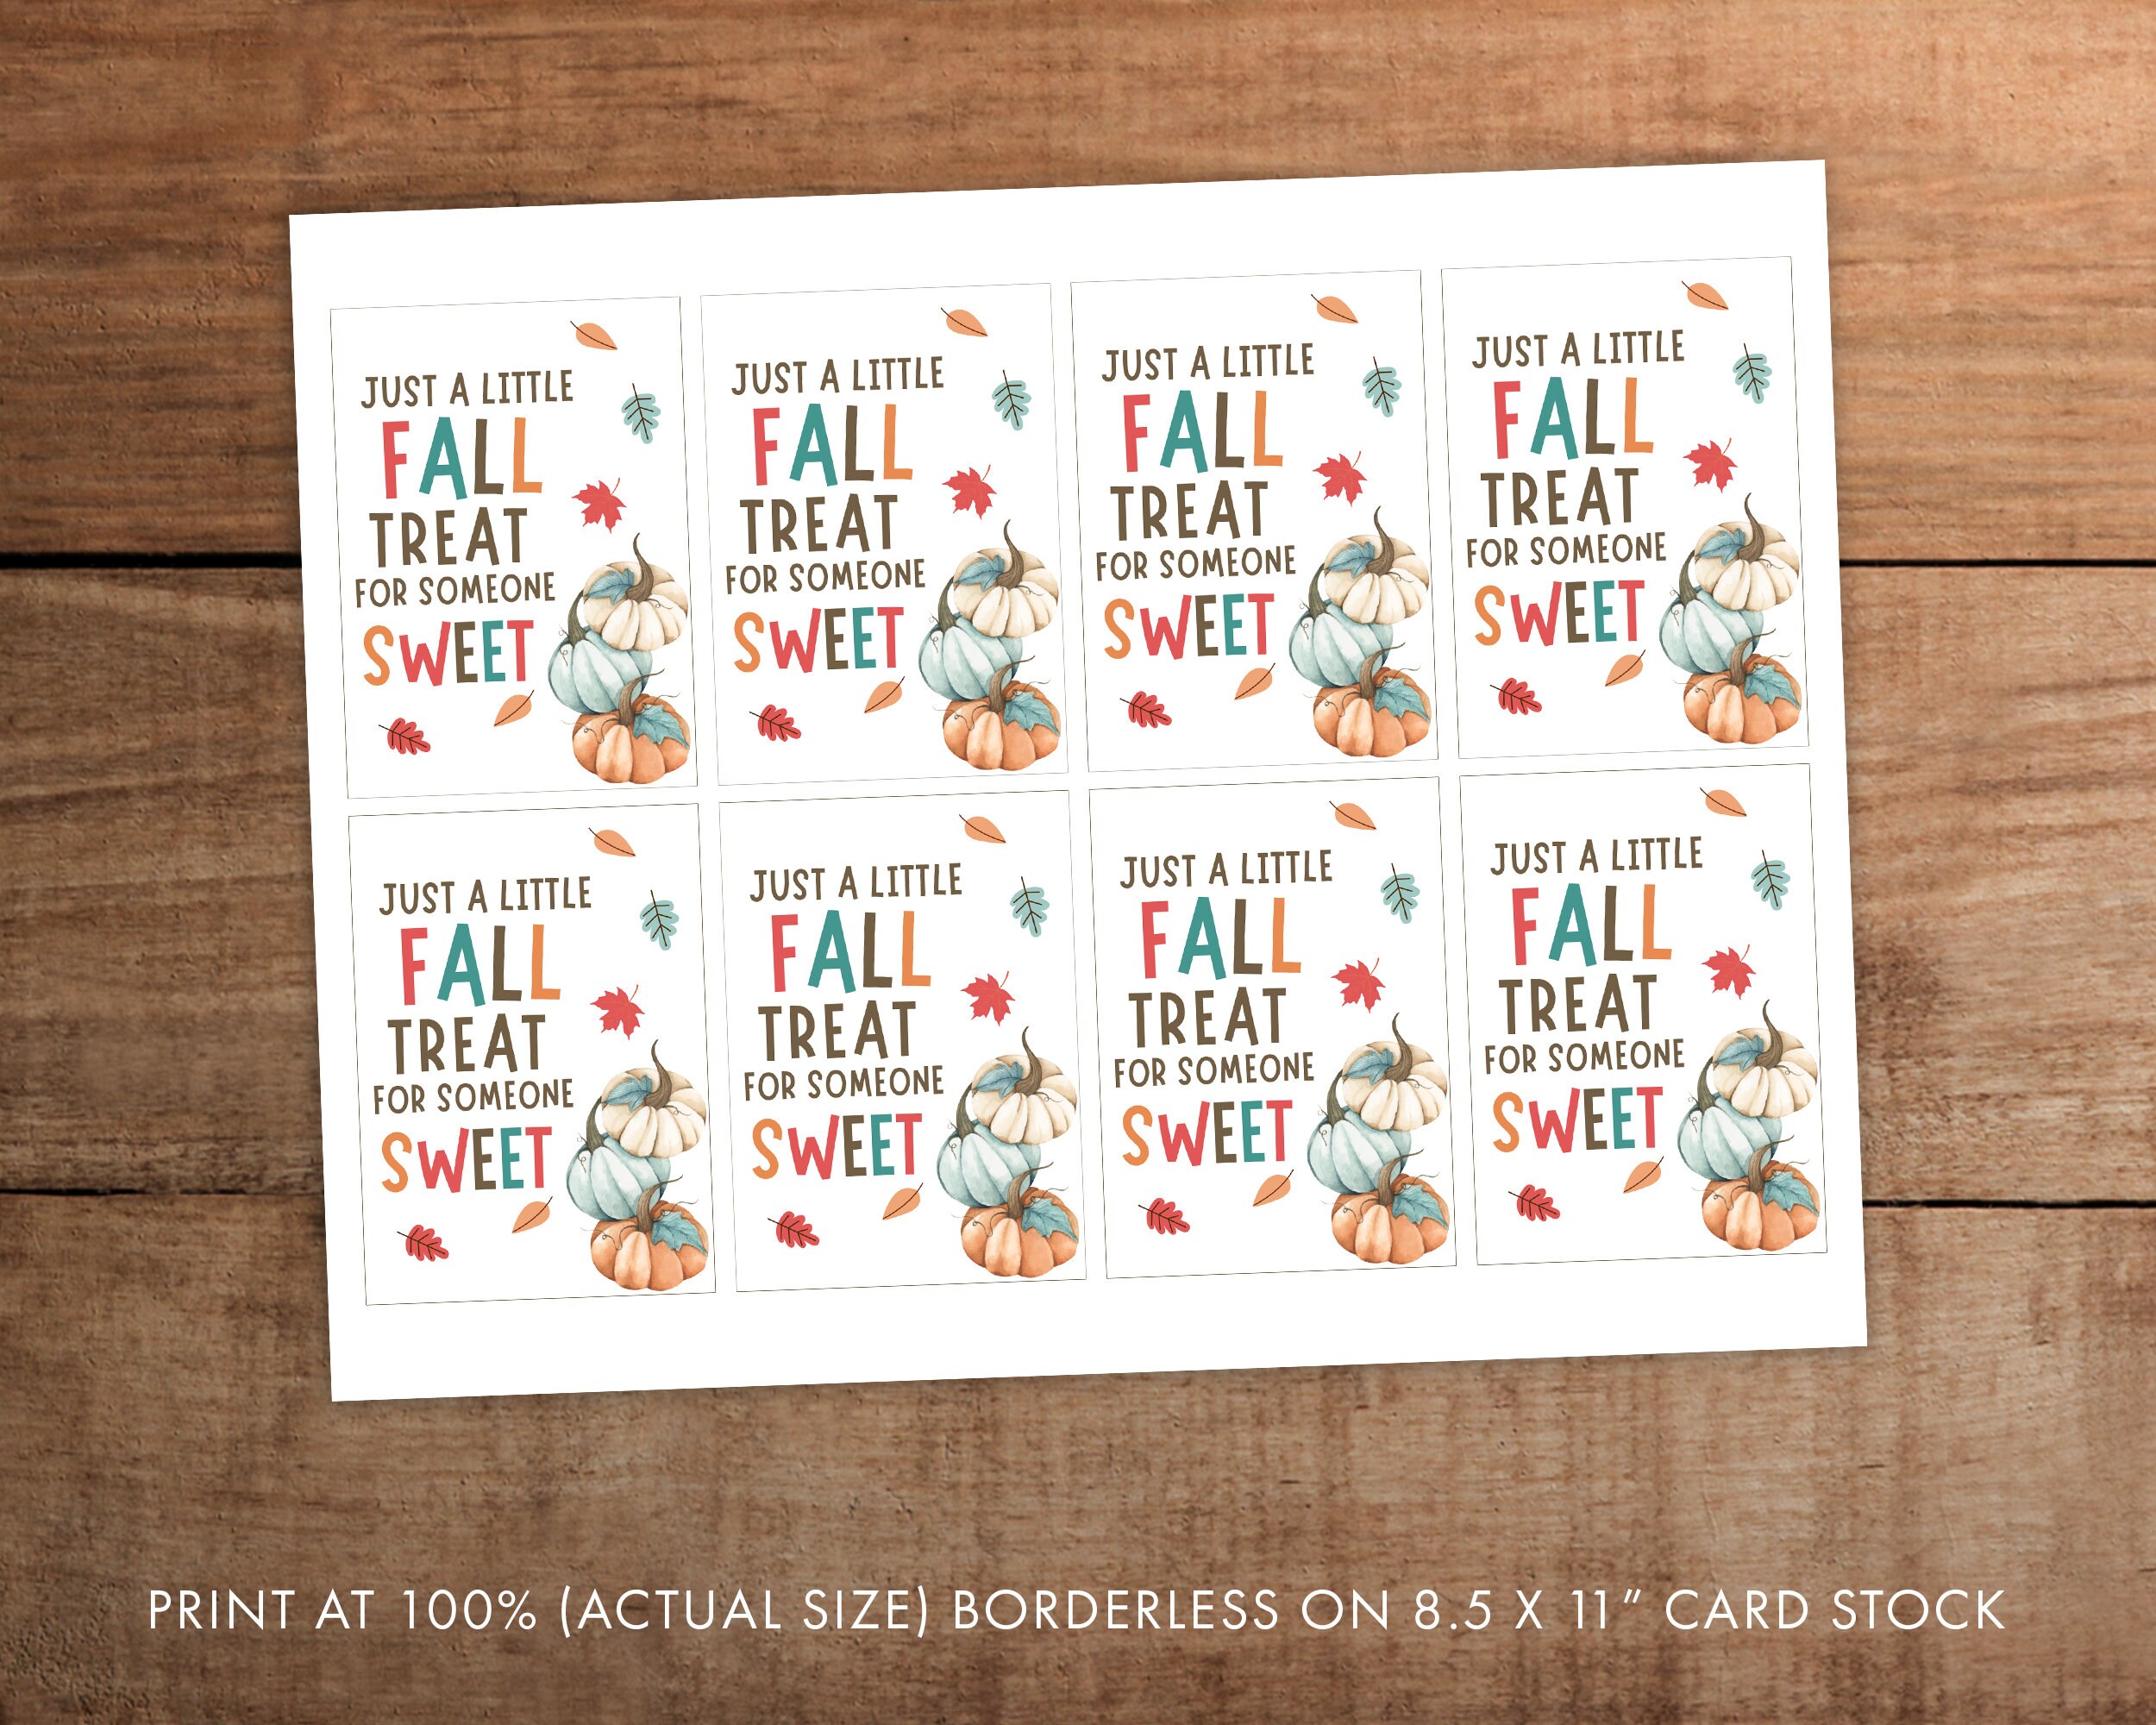 Fall Treat for Someone Sweet Gift Tag, Teacher Appreciation Fall Thank –  Cute Party Dash